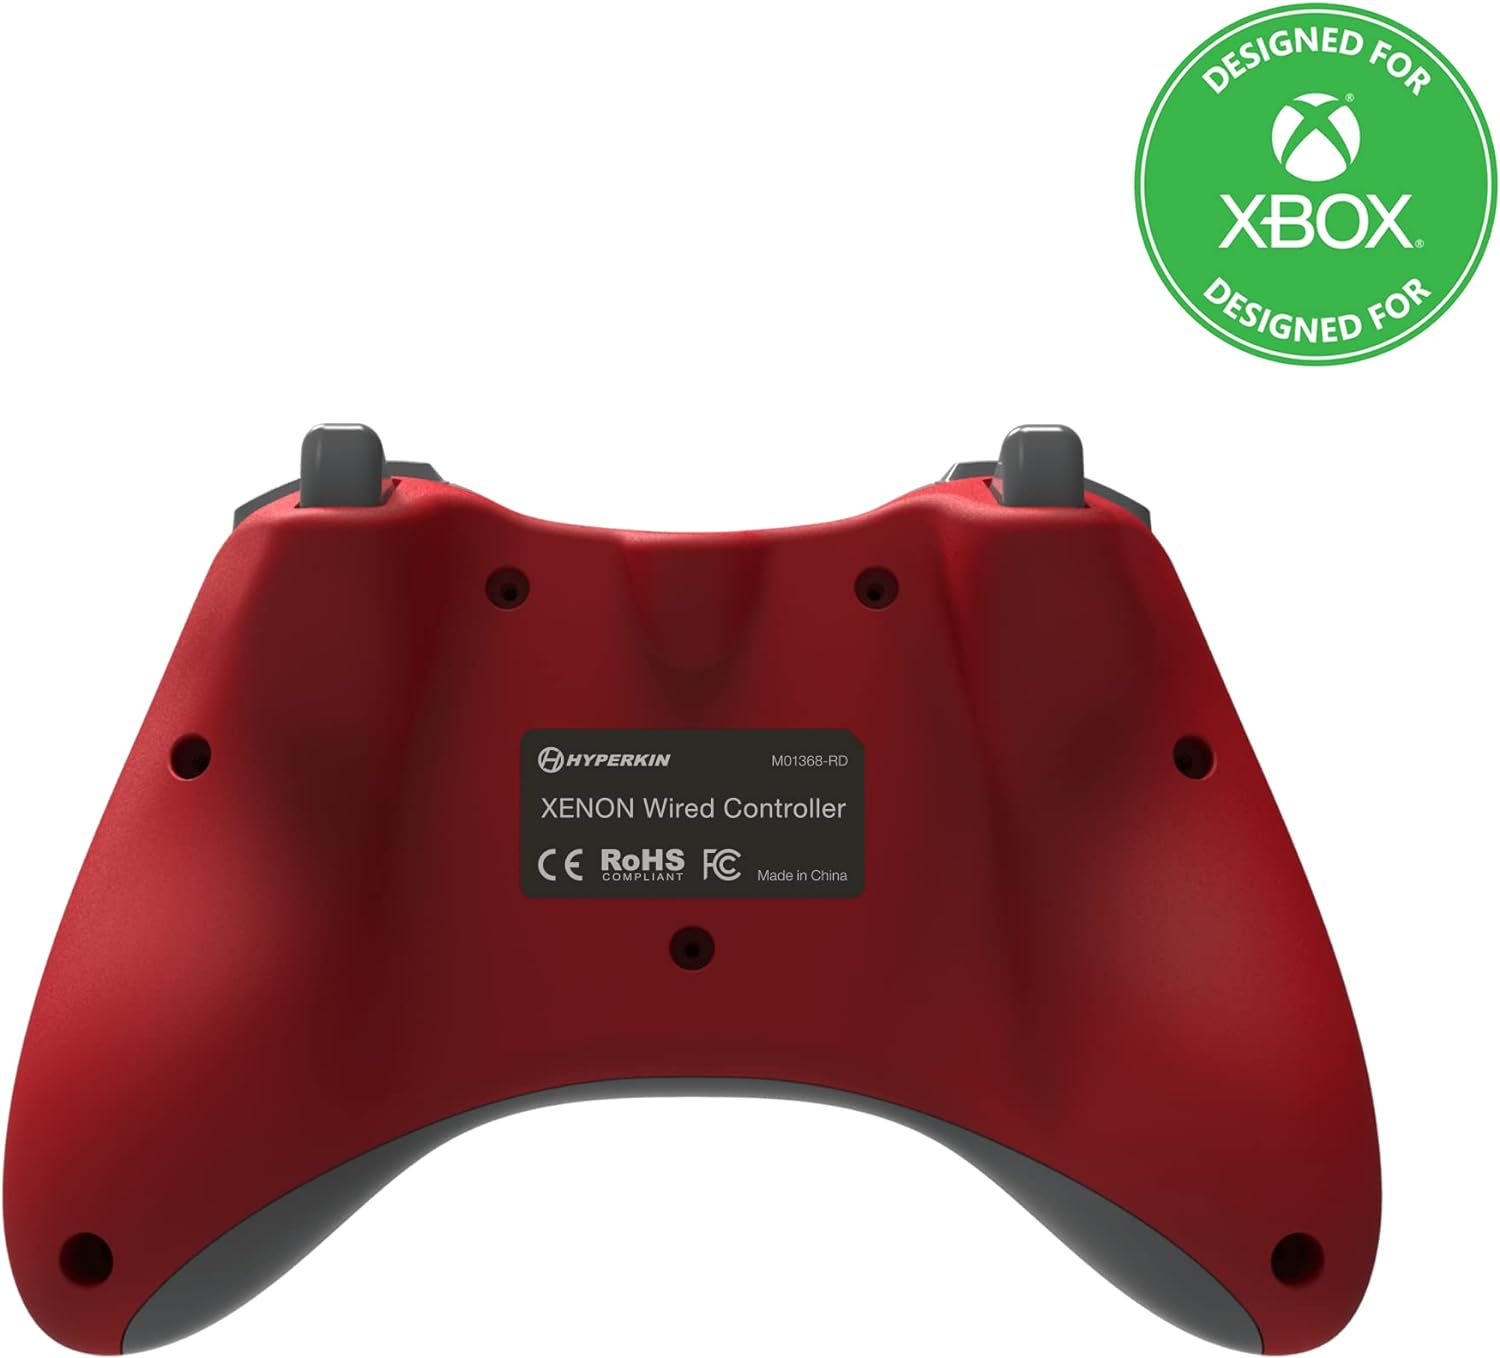 Hyperkin Xenon Wired Controller for Microsoft Xbox One / Series S / X